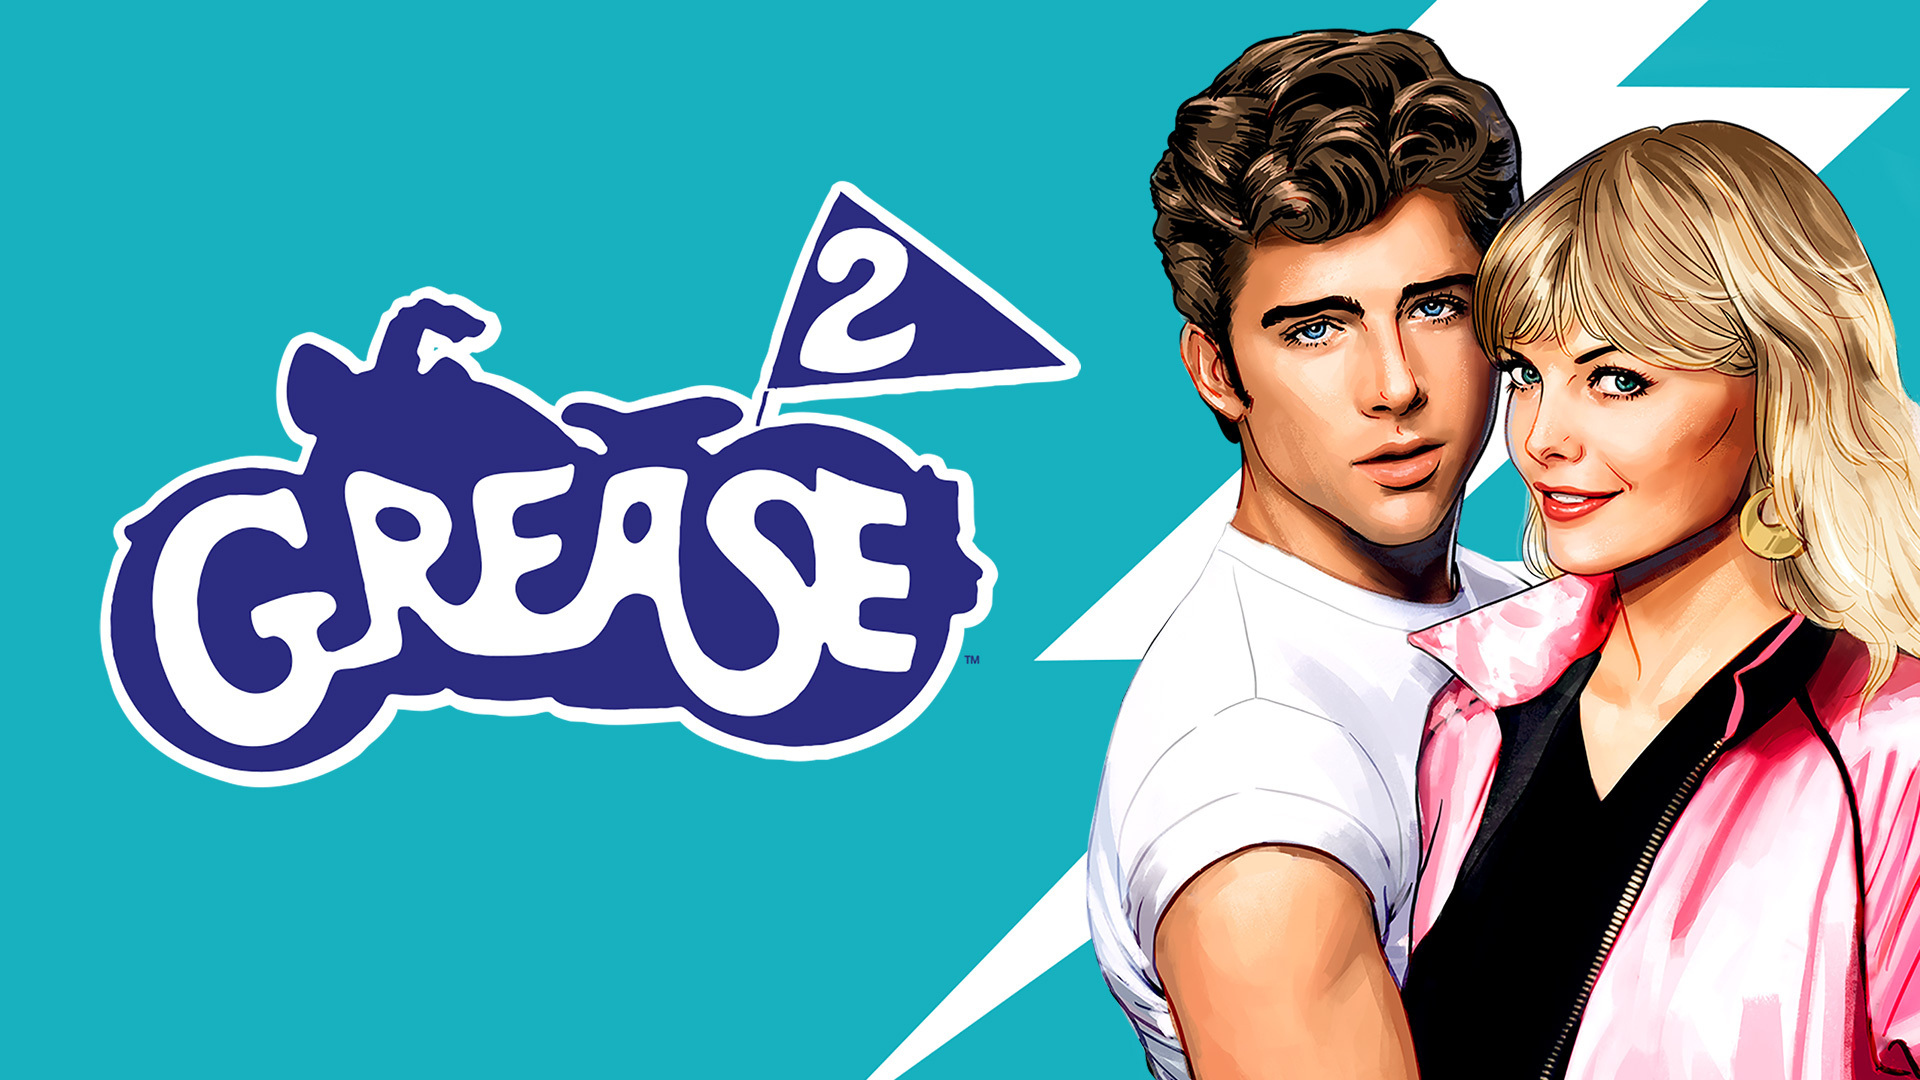 Best of Grease full movie dailymotion